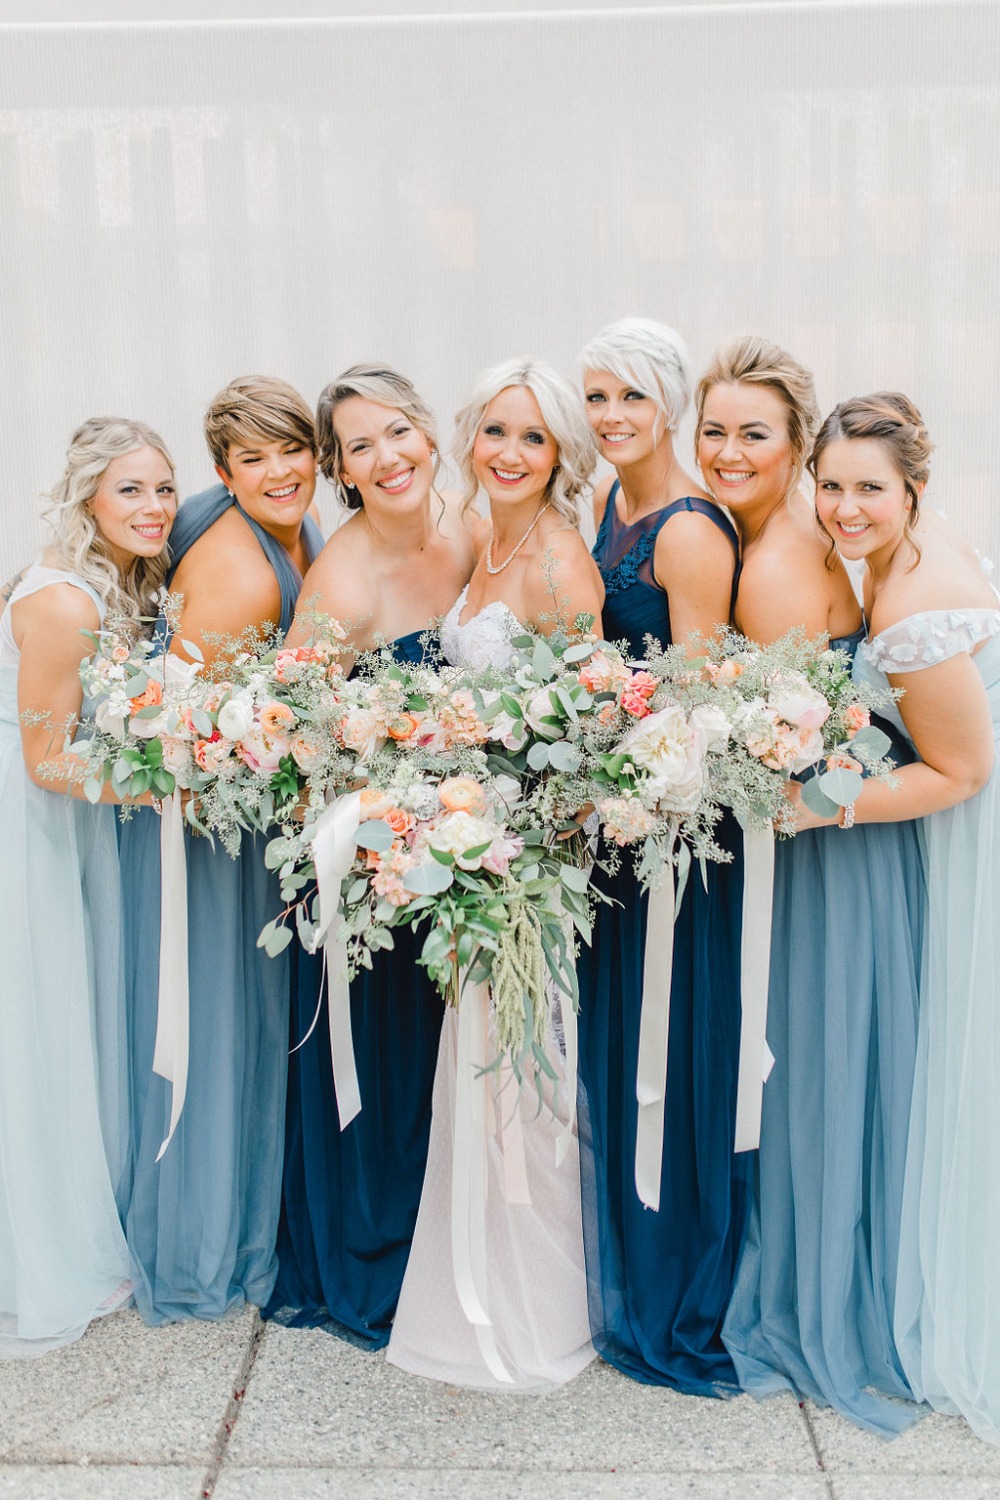 Bridesmaids in shades of blue